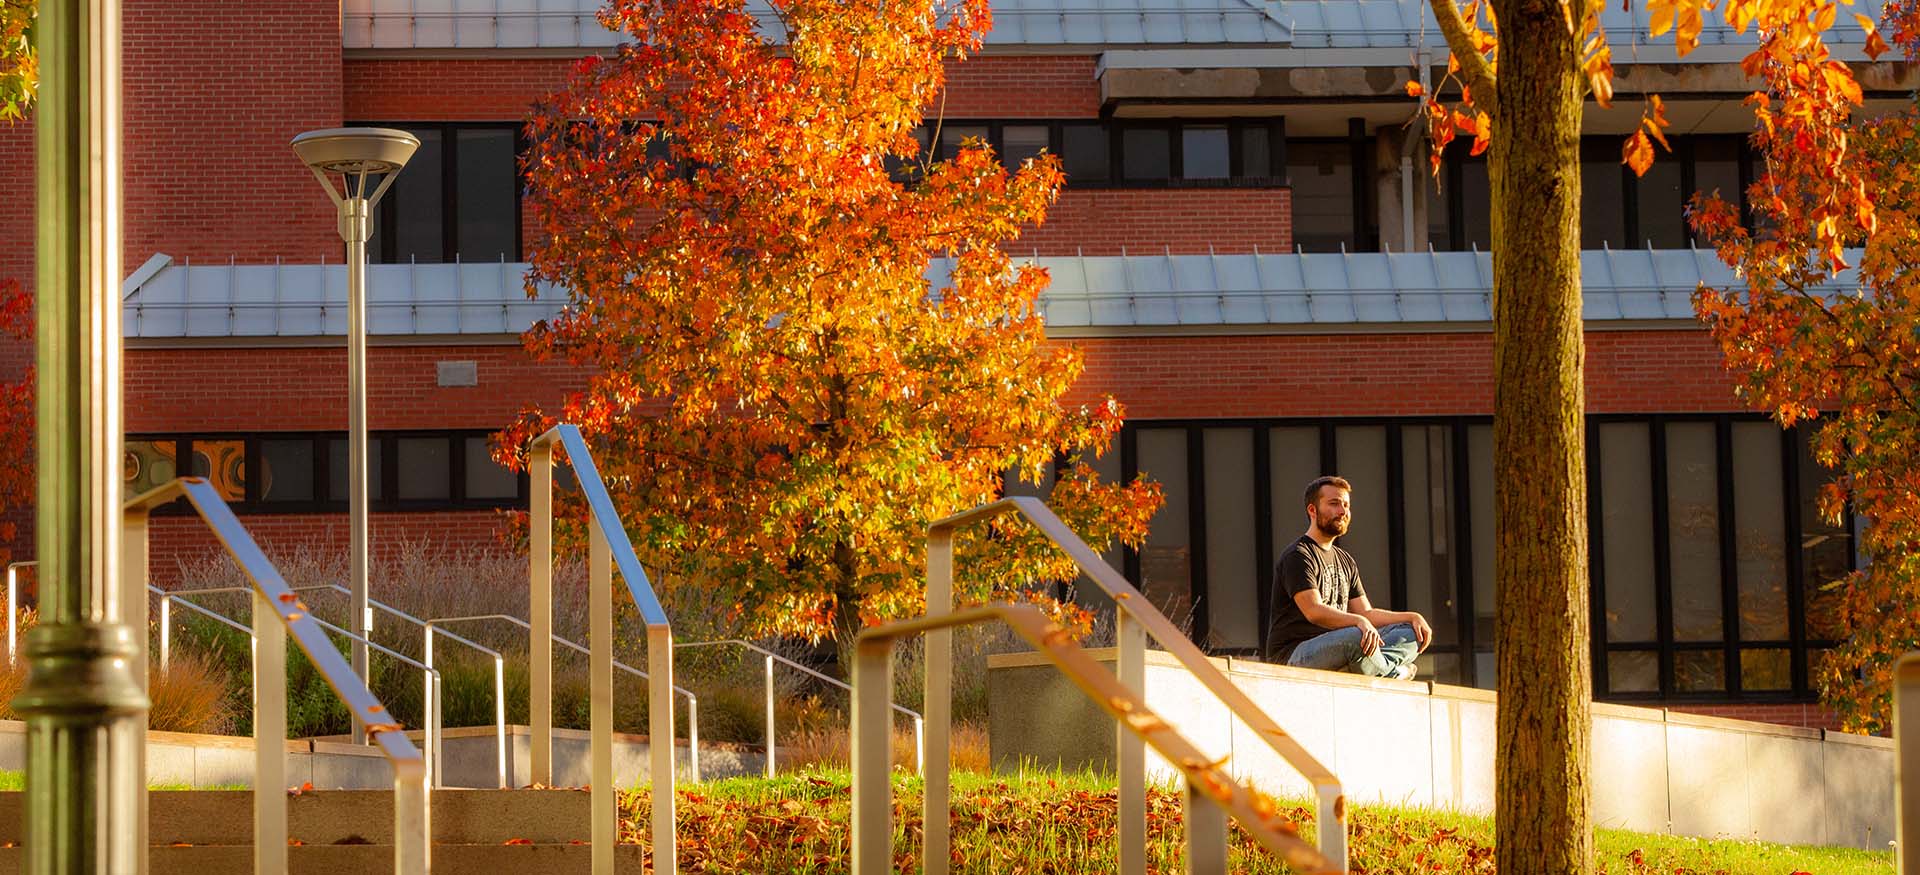 student enjoying the view surrounded by fall foliage